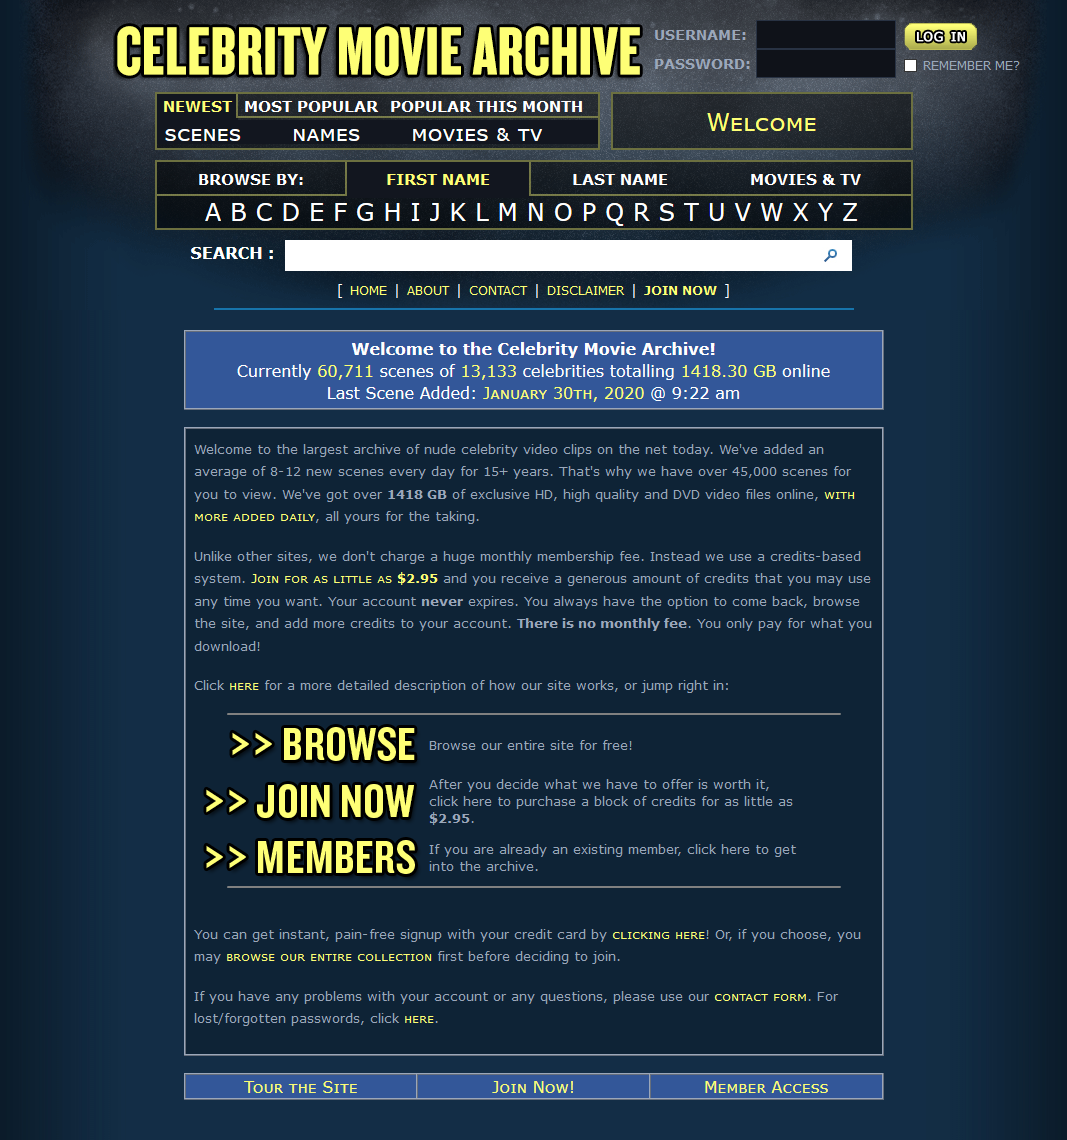 christopher hinkley recommends celebrity movie archive com pic